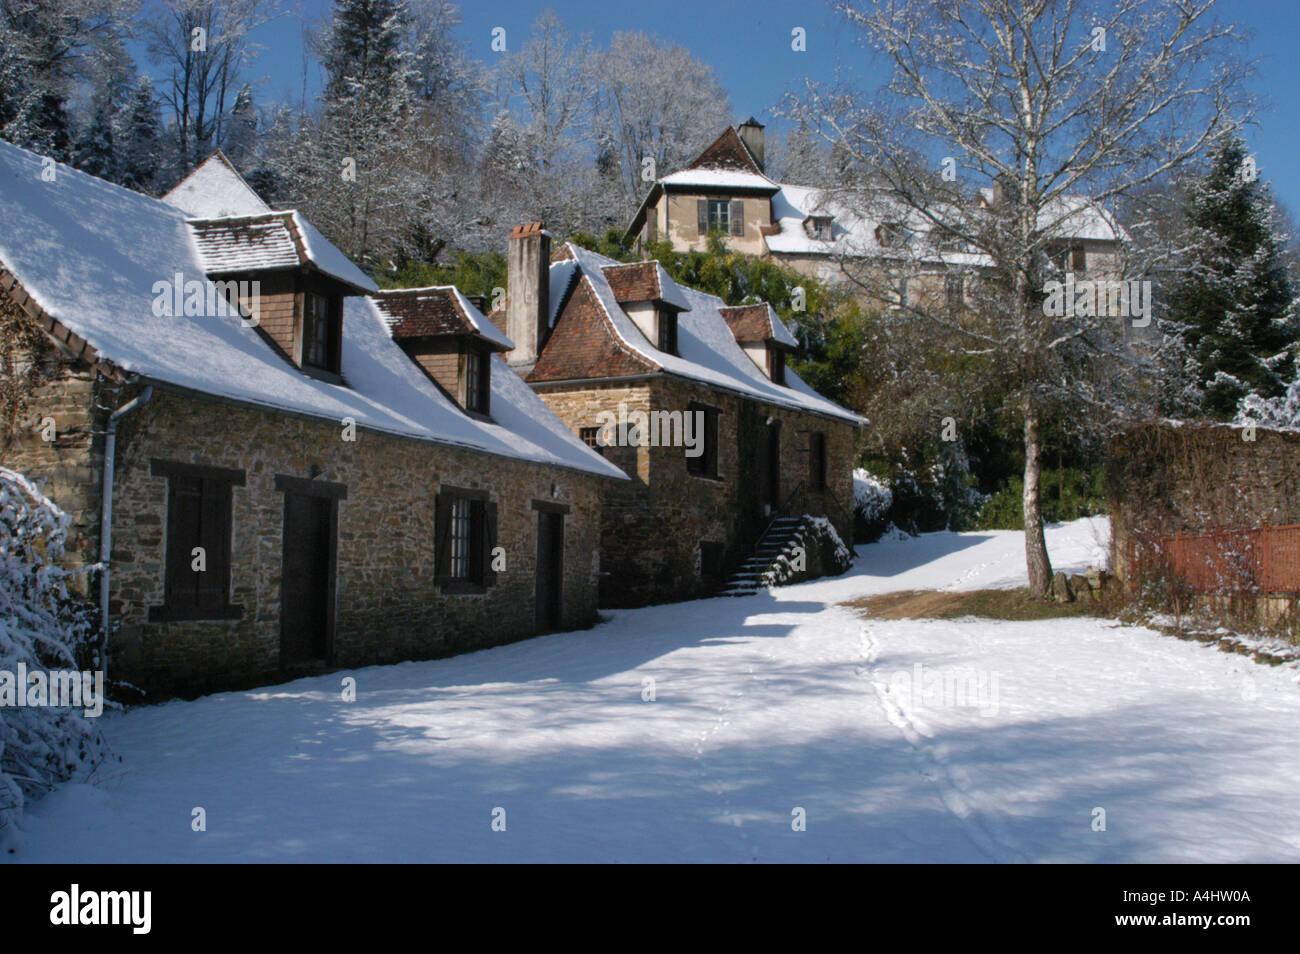 french holiday gites in the snow with trees Stock Photo